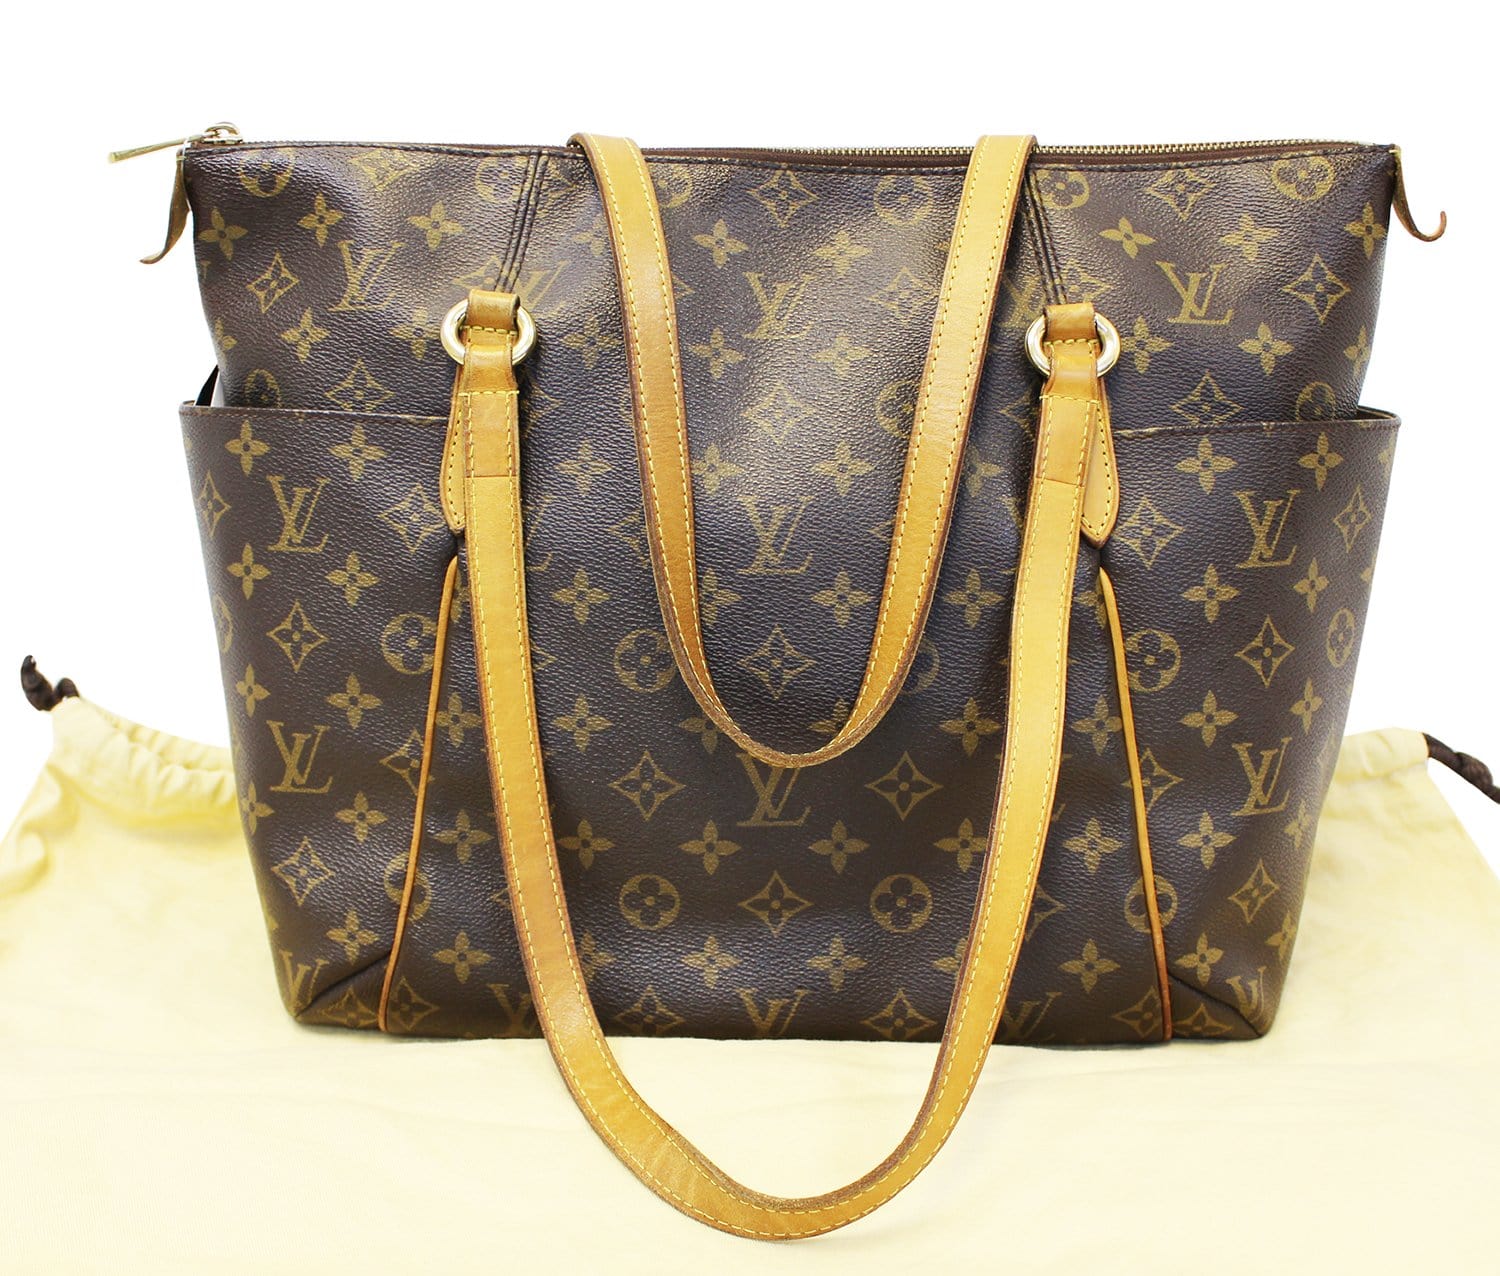 LOUIS VUITTON Used Monogram Canvas Totally MM Tote Brown Bag